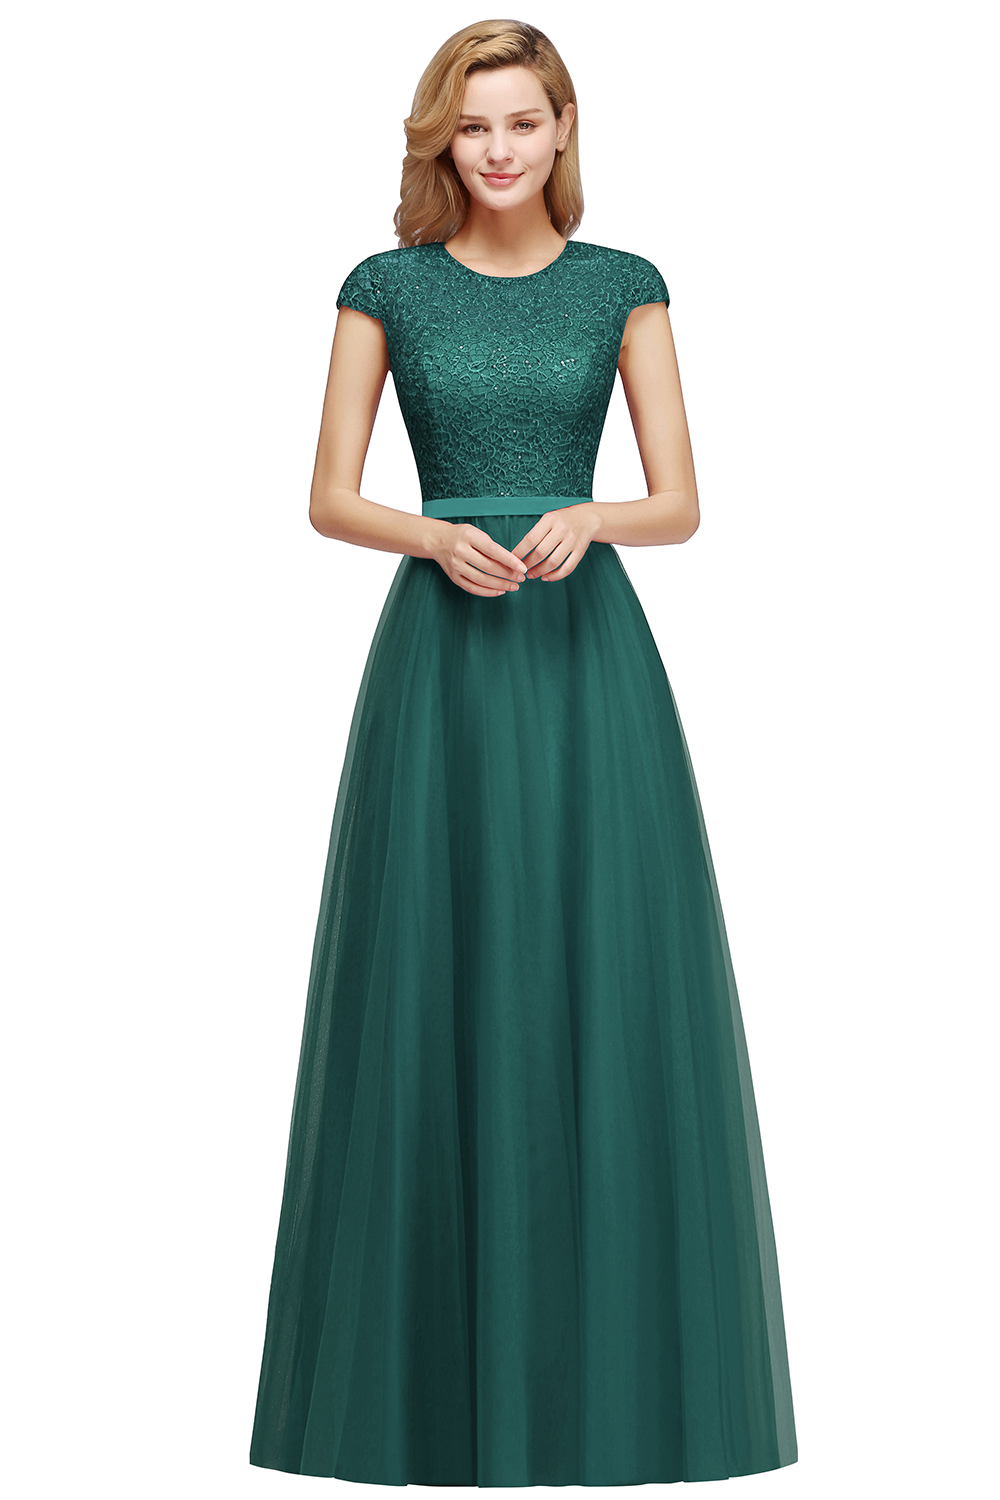 Elegant Evening Dresses A Line Jewel Neck Sleeveless Long Maxi Lace Appqulies Chiffon Skirt Prom Party Gowns Bridesmaid Wear CPS1132